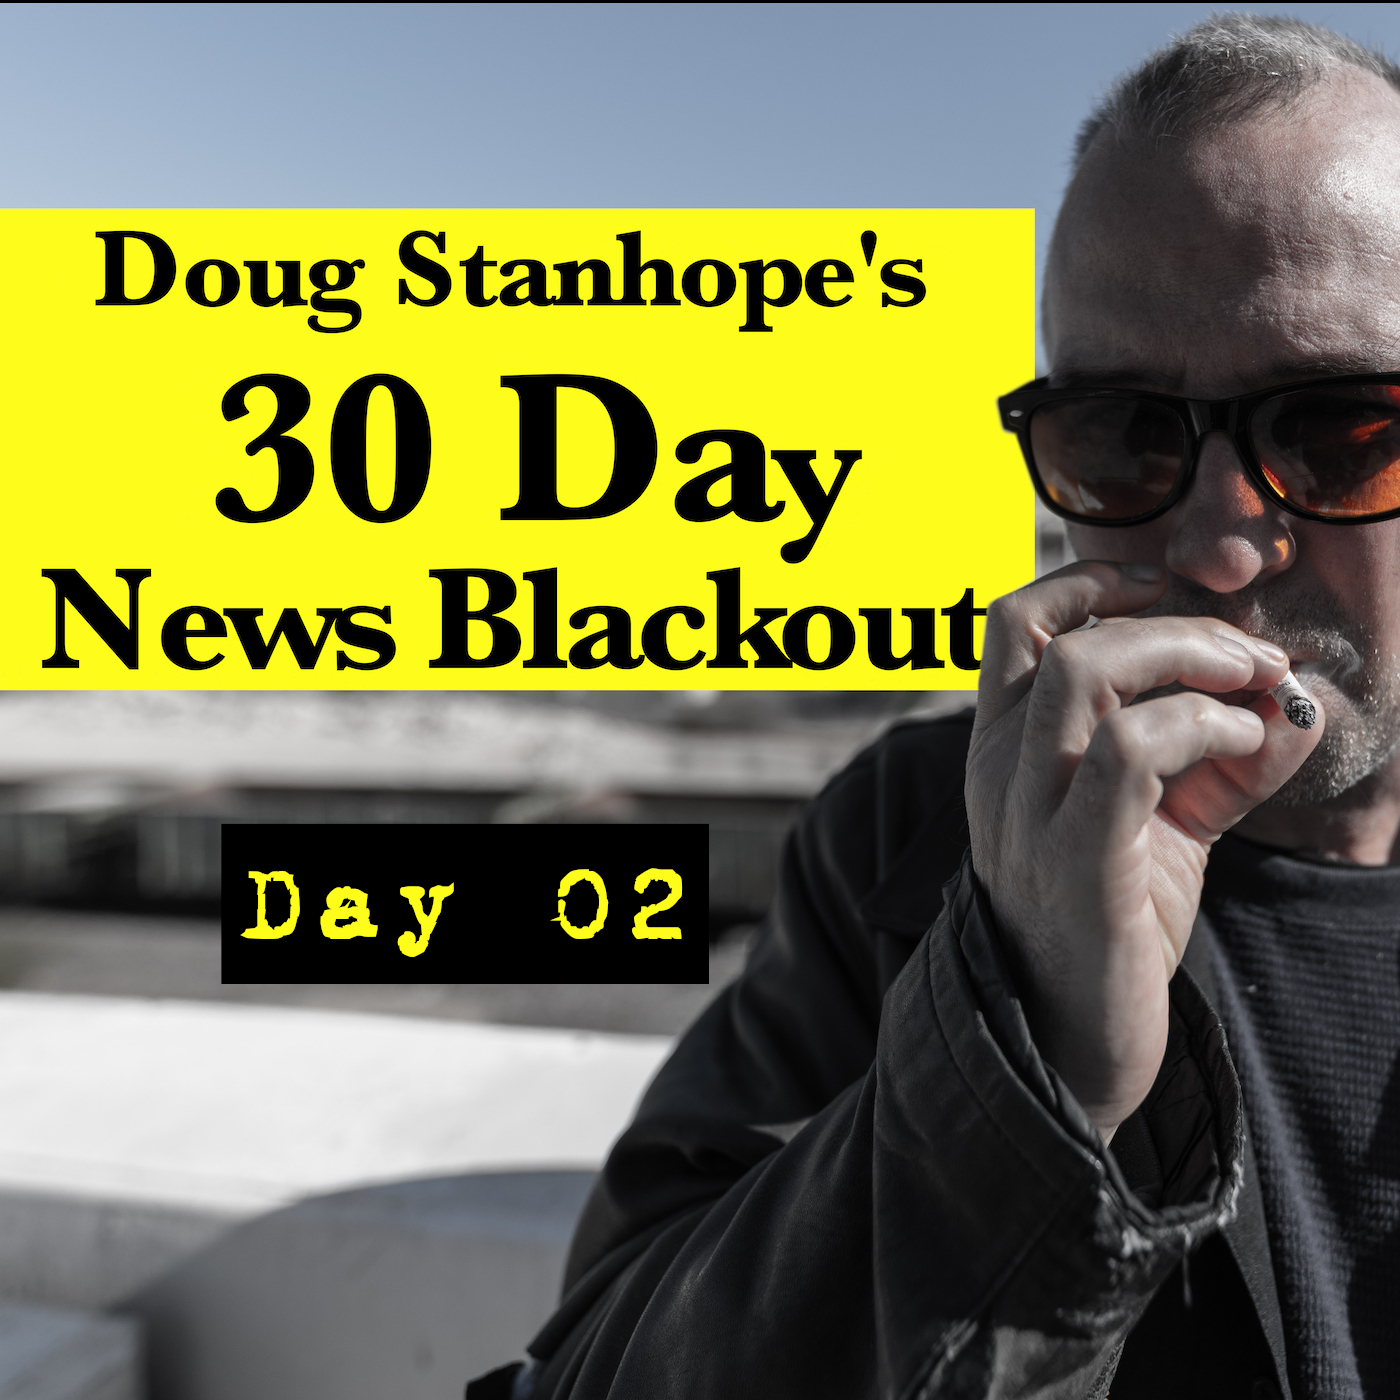 Ep.#365: Day 02 - Stanhope’s 30 Day News Blackout